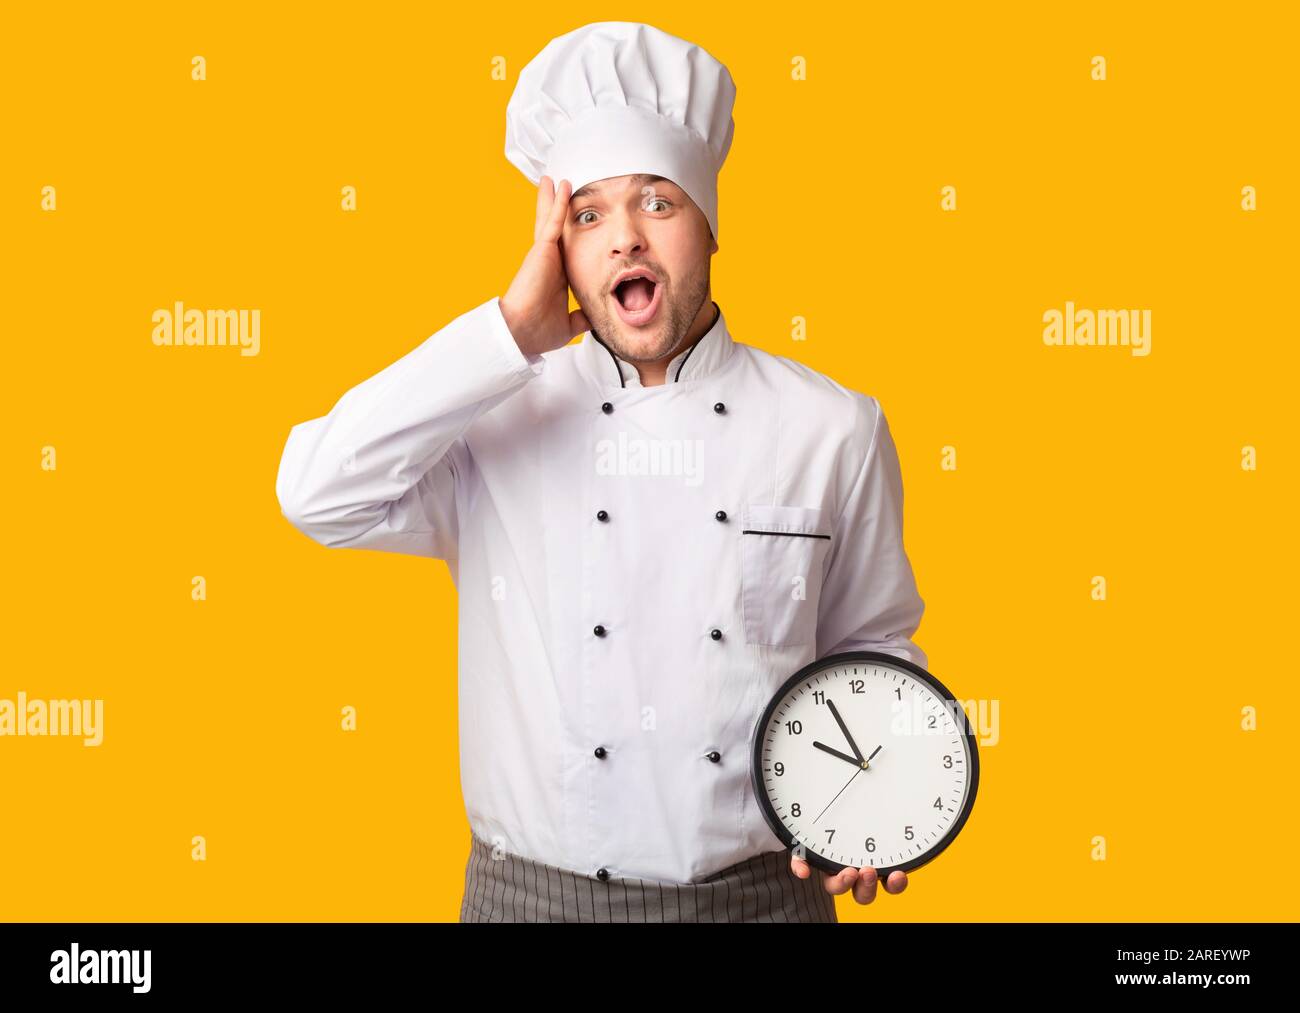 Shocked Cook Guy In A Hurry Holding Clock, Studio Shot Stock Photo